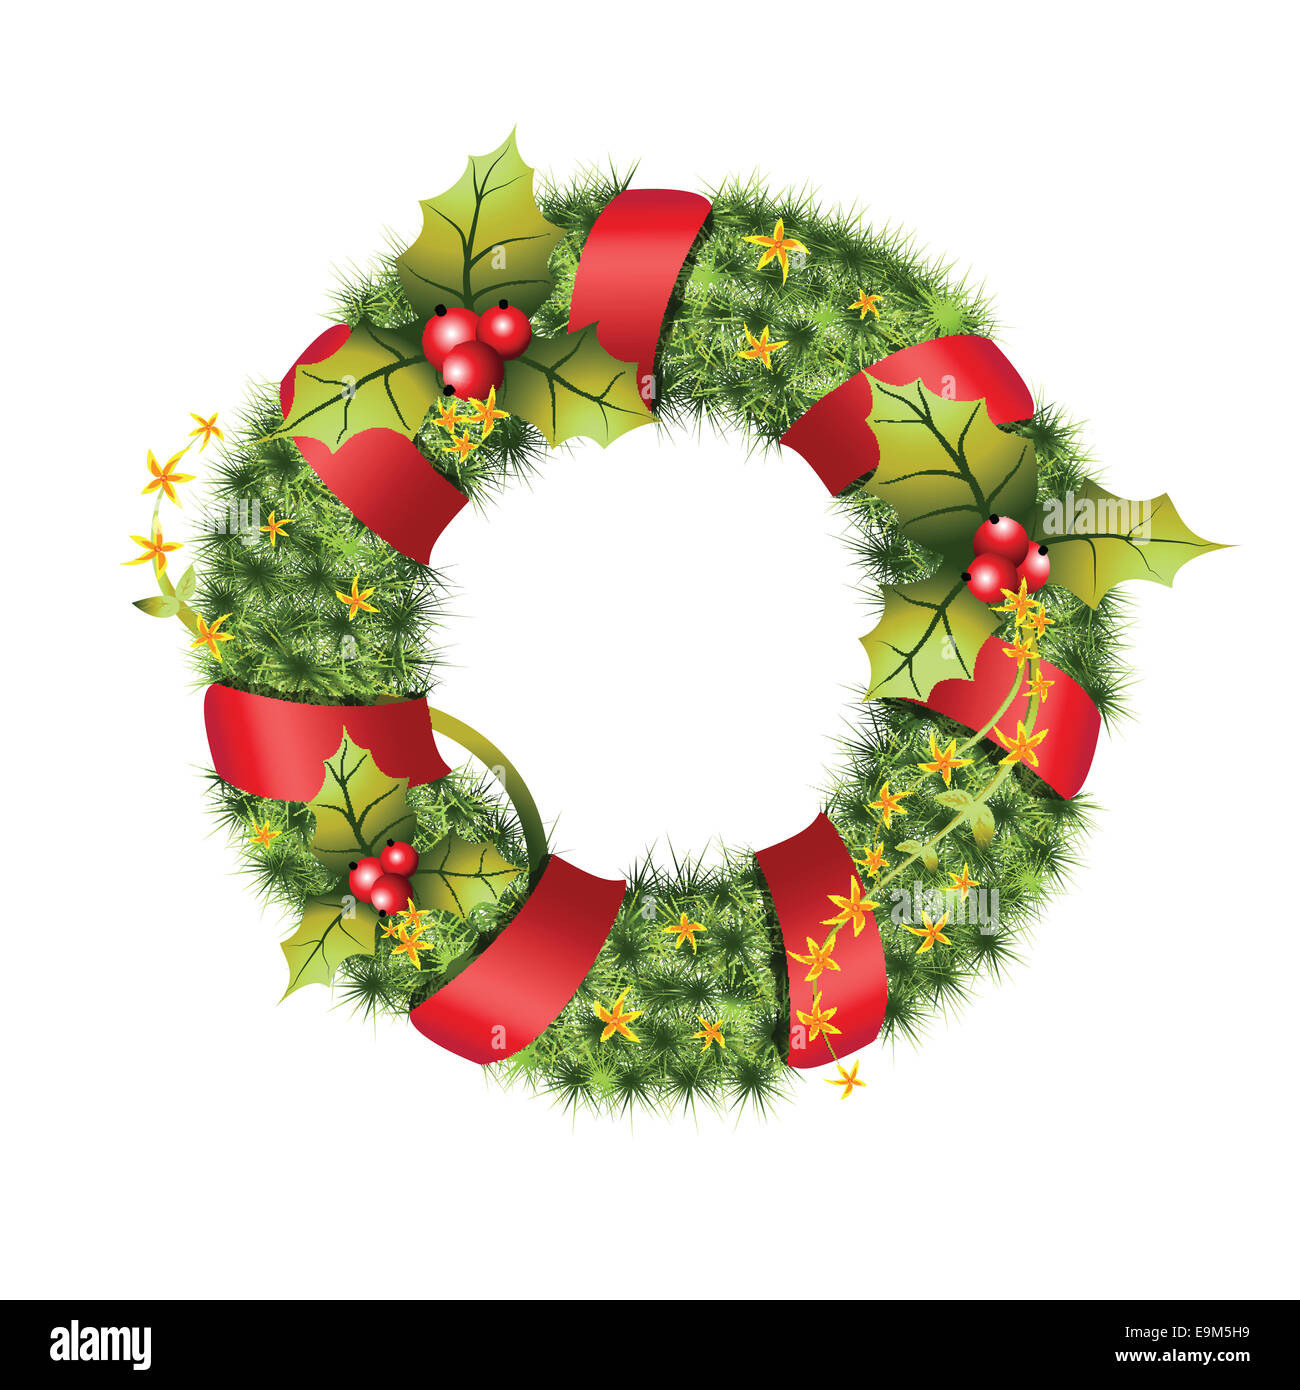 green christmas wreath with decorations isolated on white background Vector illustration Stock Image